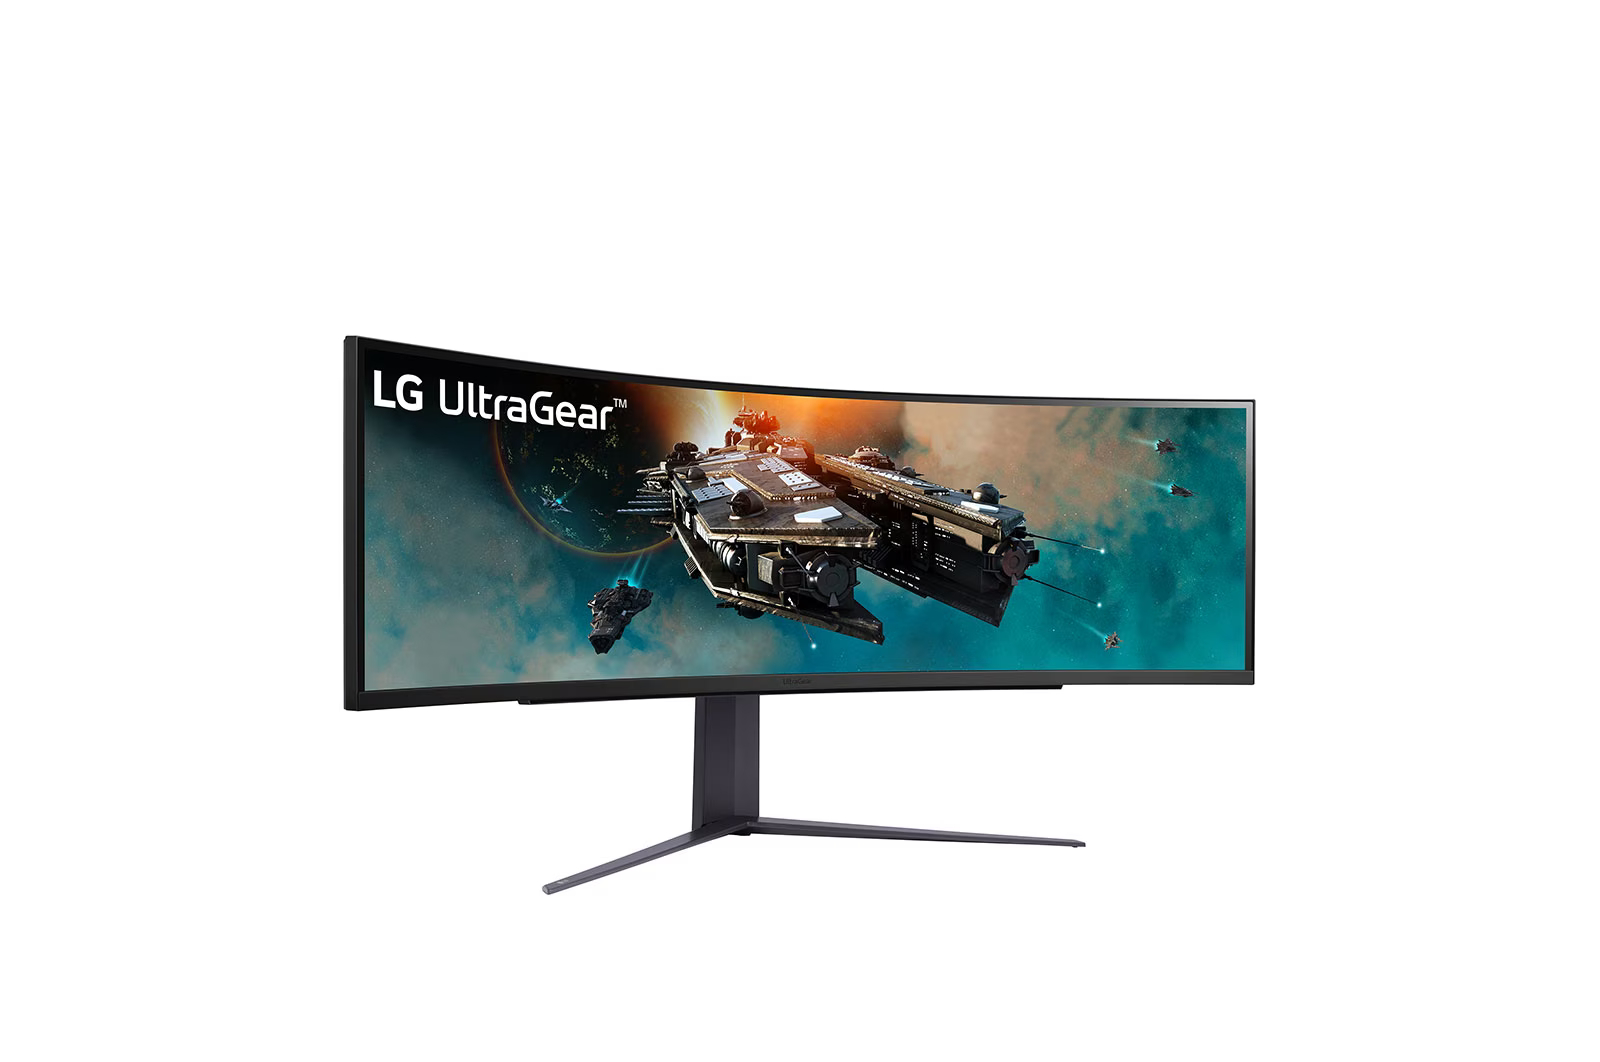 Media asset in full size related to 3dfxzone.it news item entitled as follows: Il gaming monitor LG UltraGear 49GR85DC-B da 49-inch disponibile in pre-order | Image Name: news34291_LG_UltraGear_49GR85DC-B_2.jpg